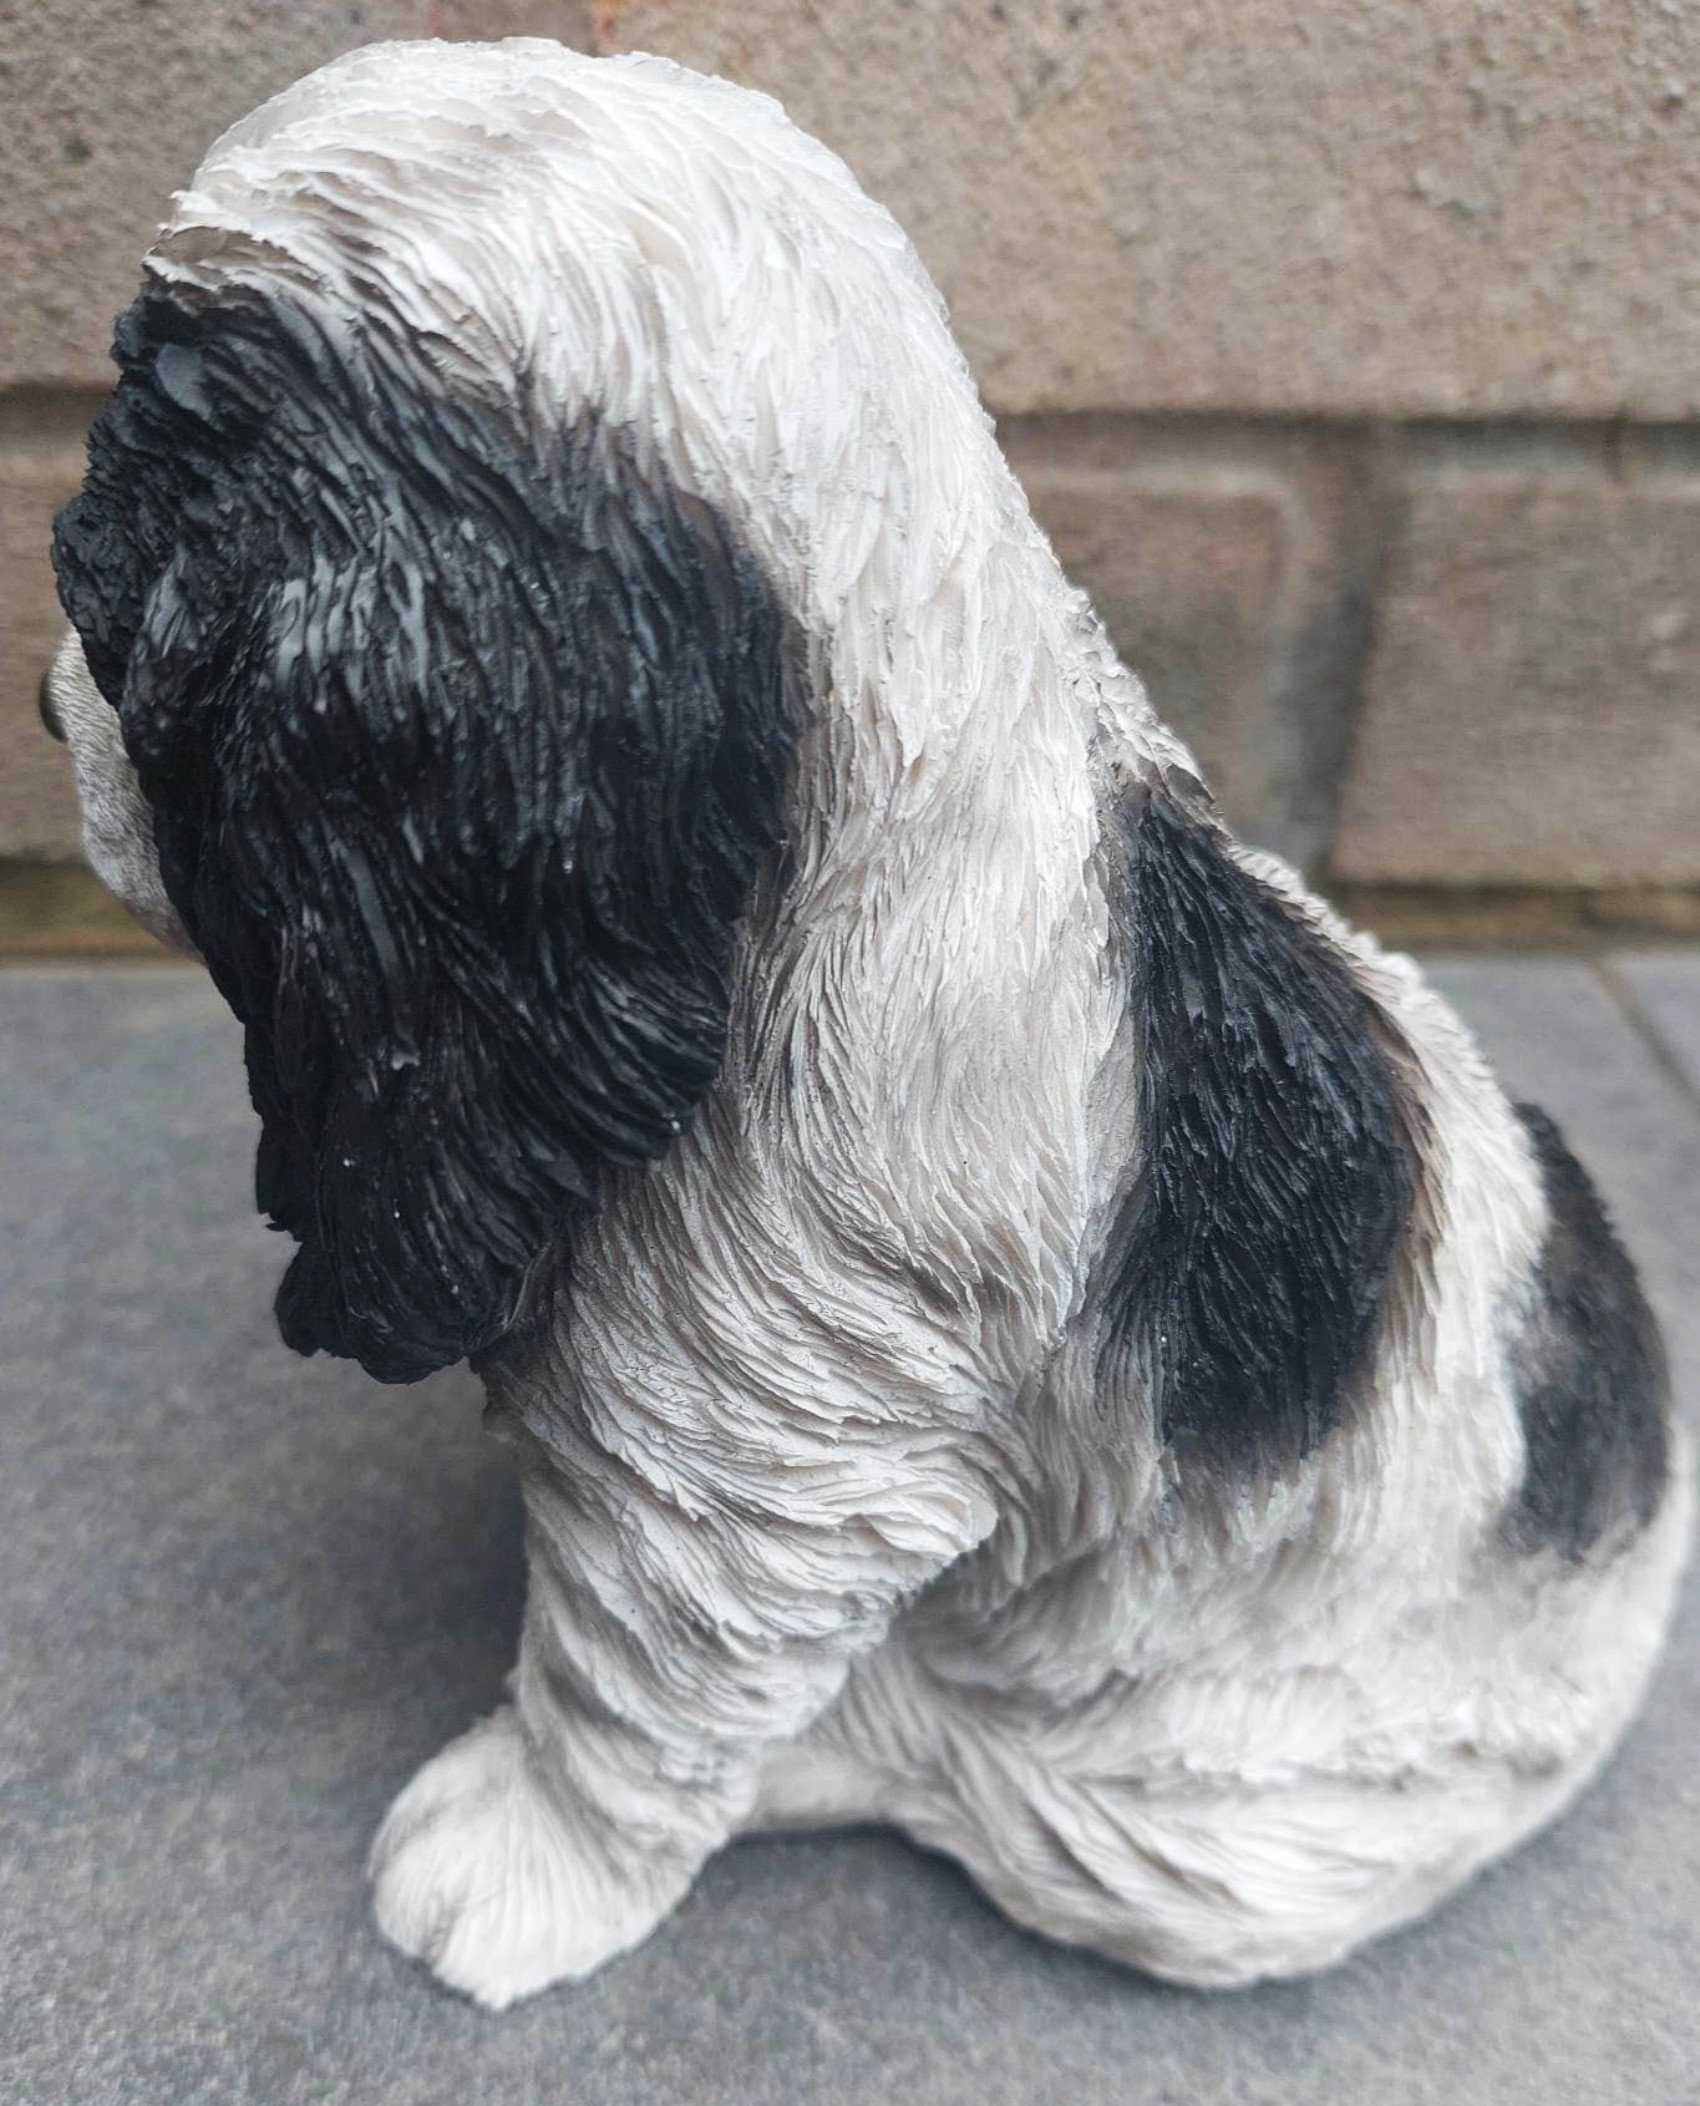 Black and White Cocker Spaniel Puppy Garden or Home Ornament - Image 2 of 5